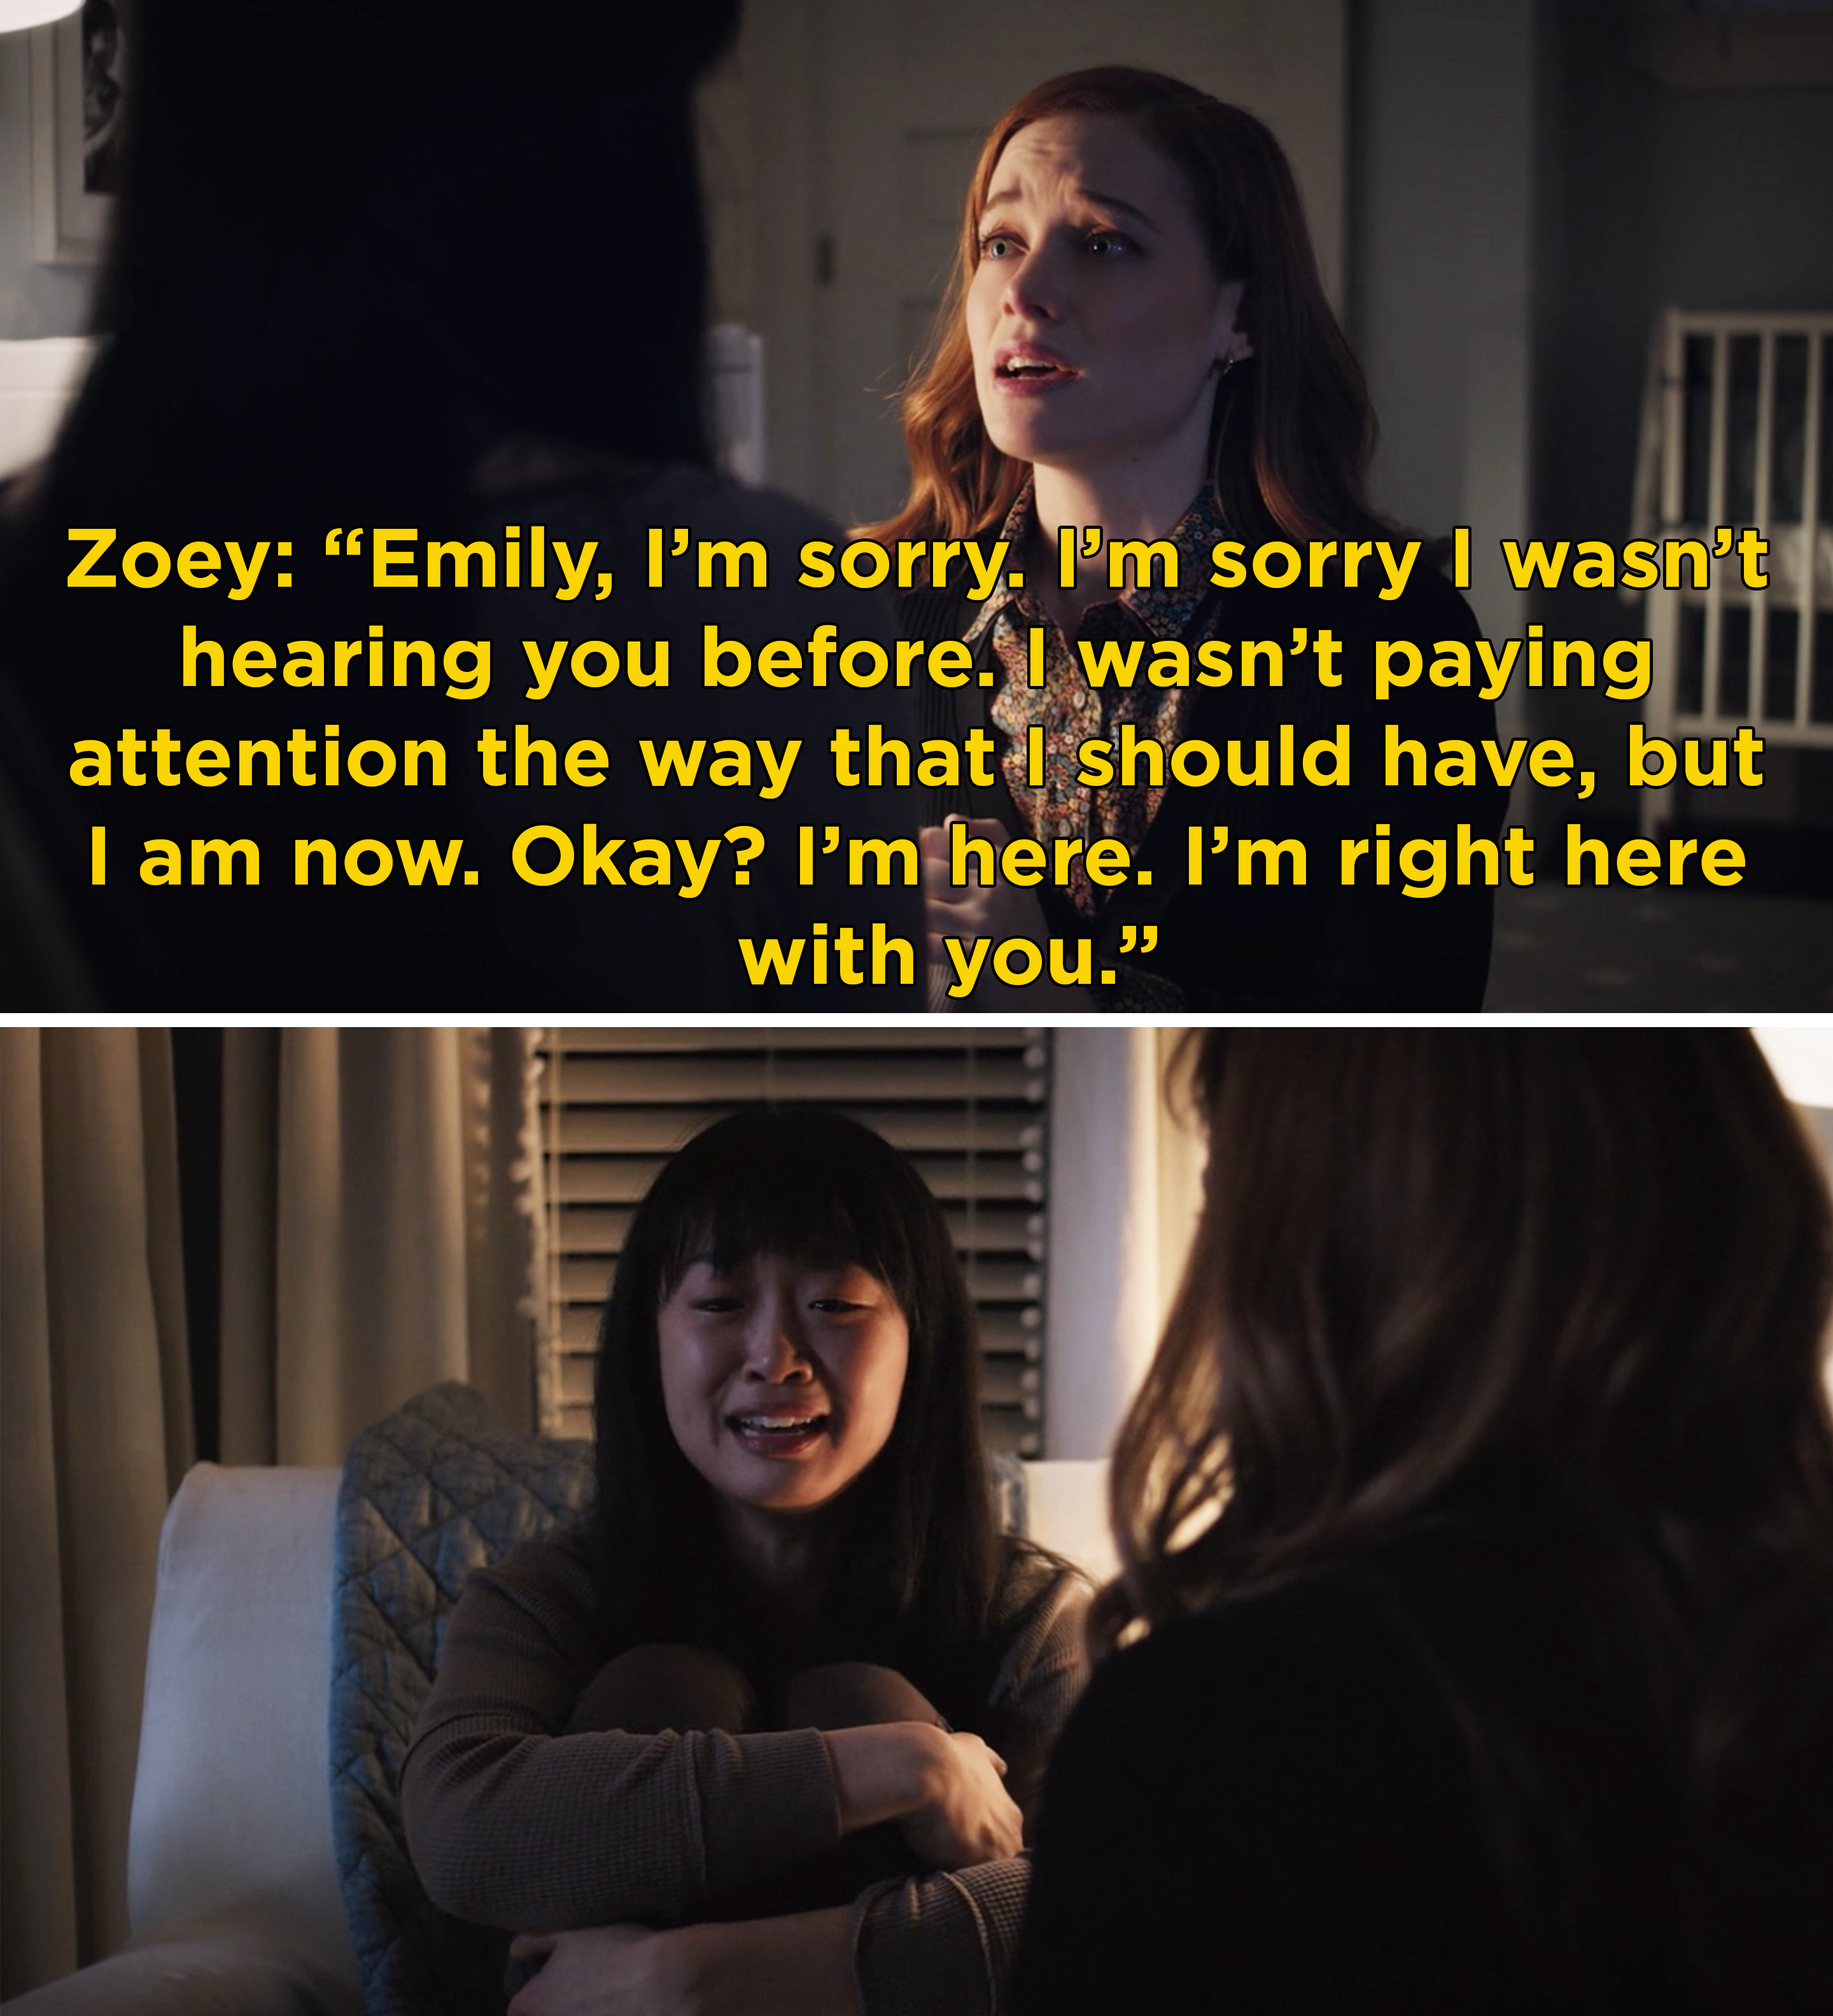 Zoey apologizing to Emily for not listening sooner, but she&#x27;s here for her now